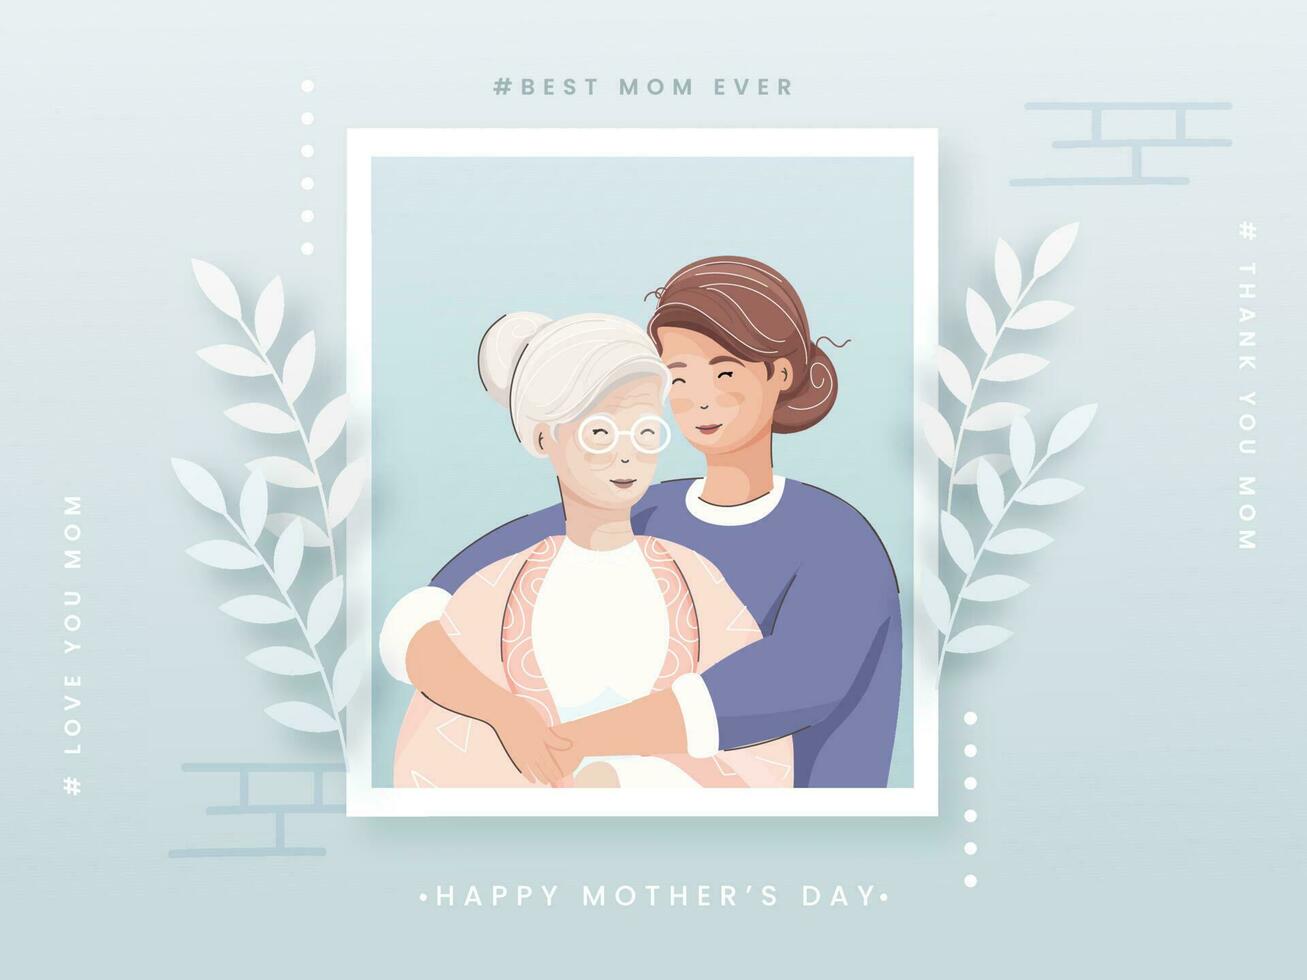 Vector illustration of young girl hugging her mother from side, beautiful grey background decorated by white paper leaves. Concept for Happy Mother's Day.